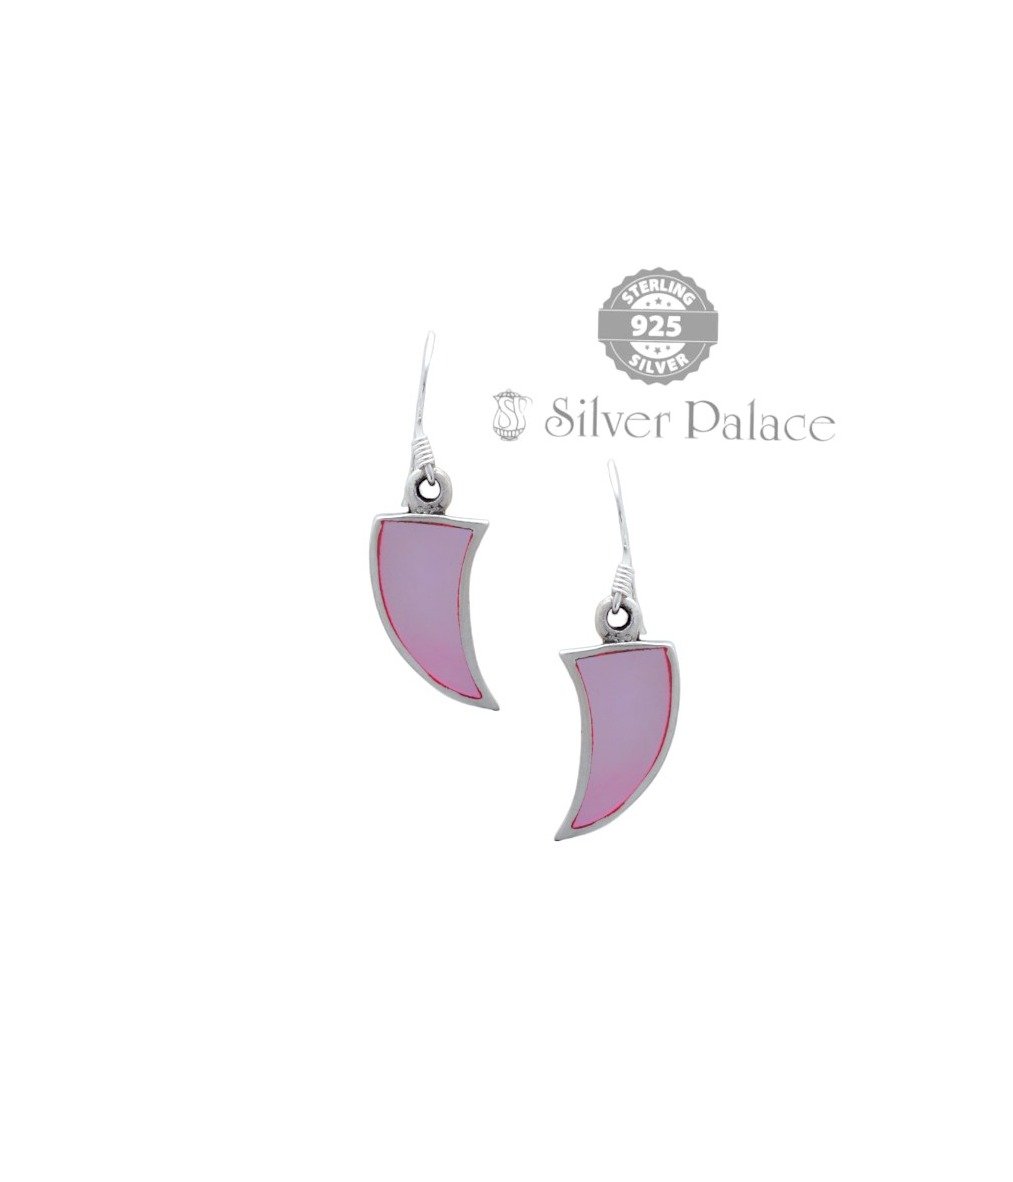 92.5 Silver Trishe Collections Abalone Shell Design With Fish Hook Earrings  For Girls - Silver Palace